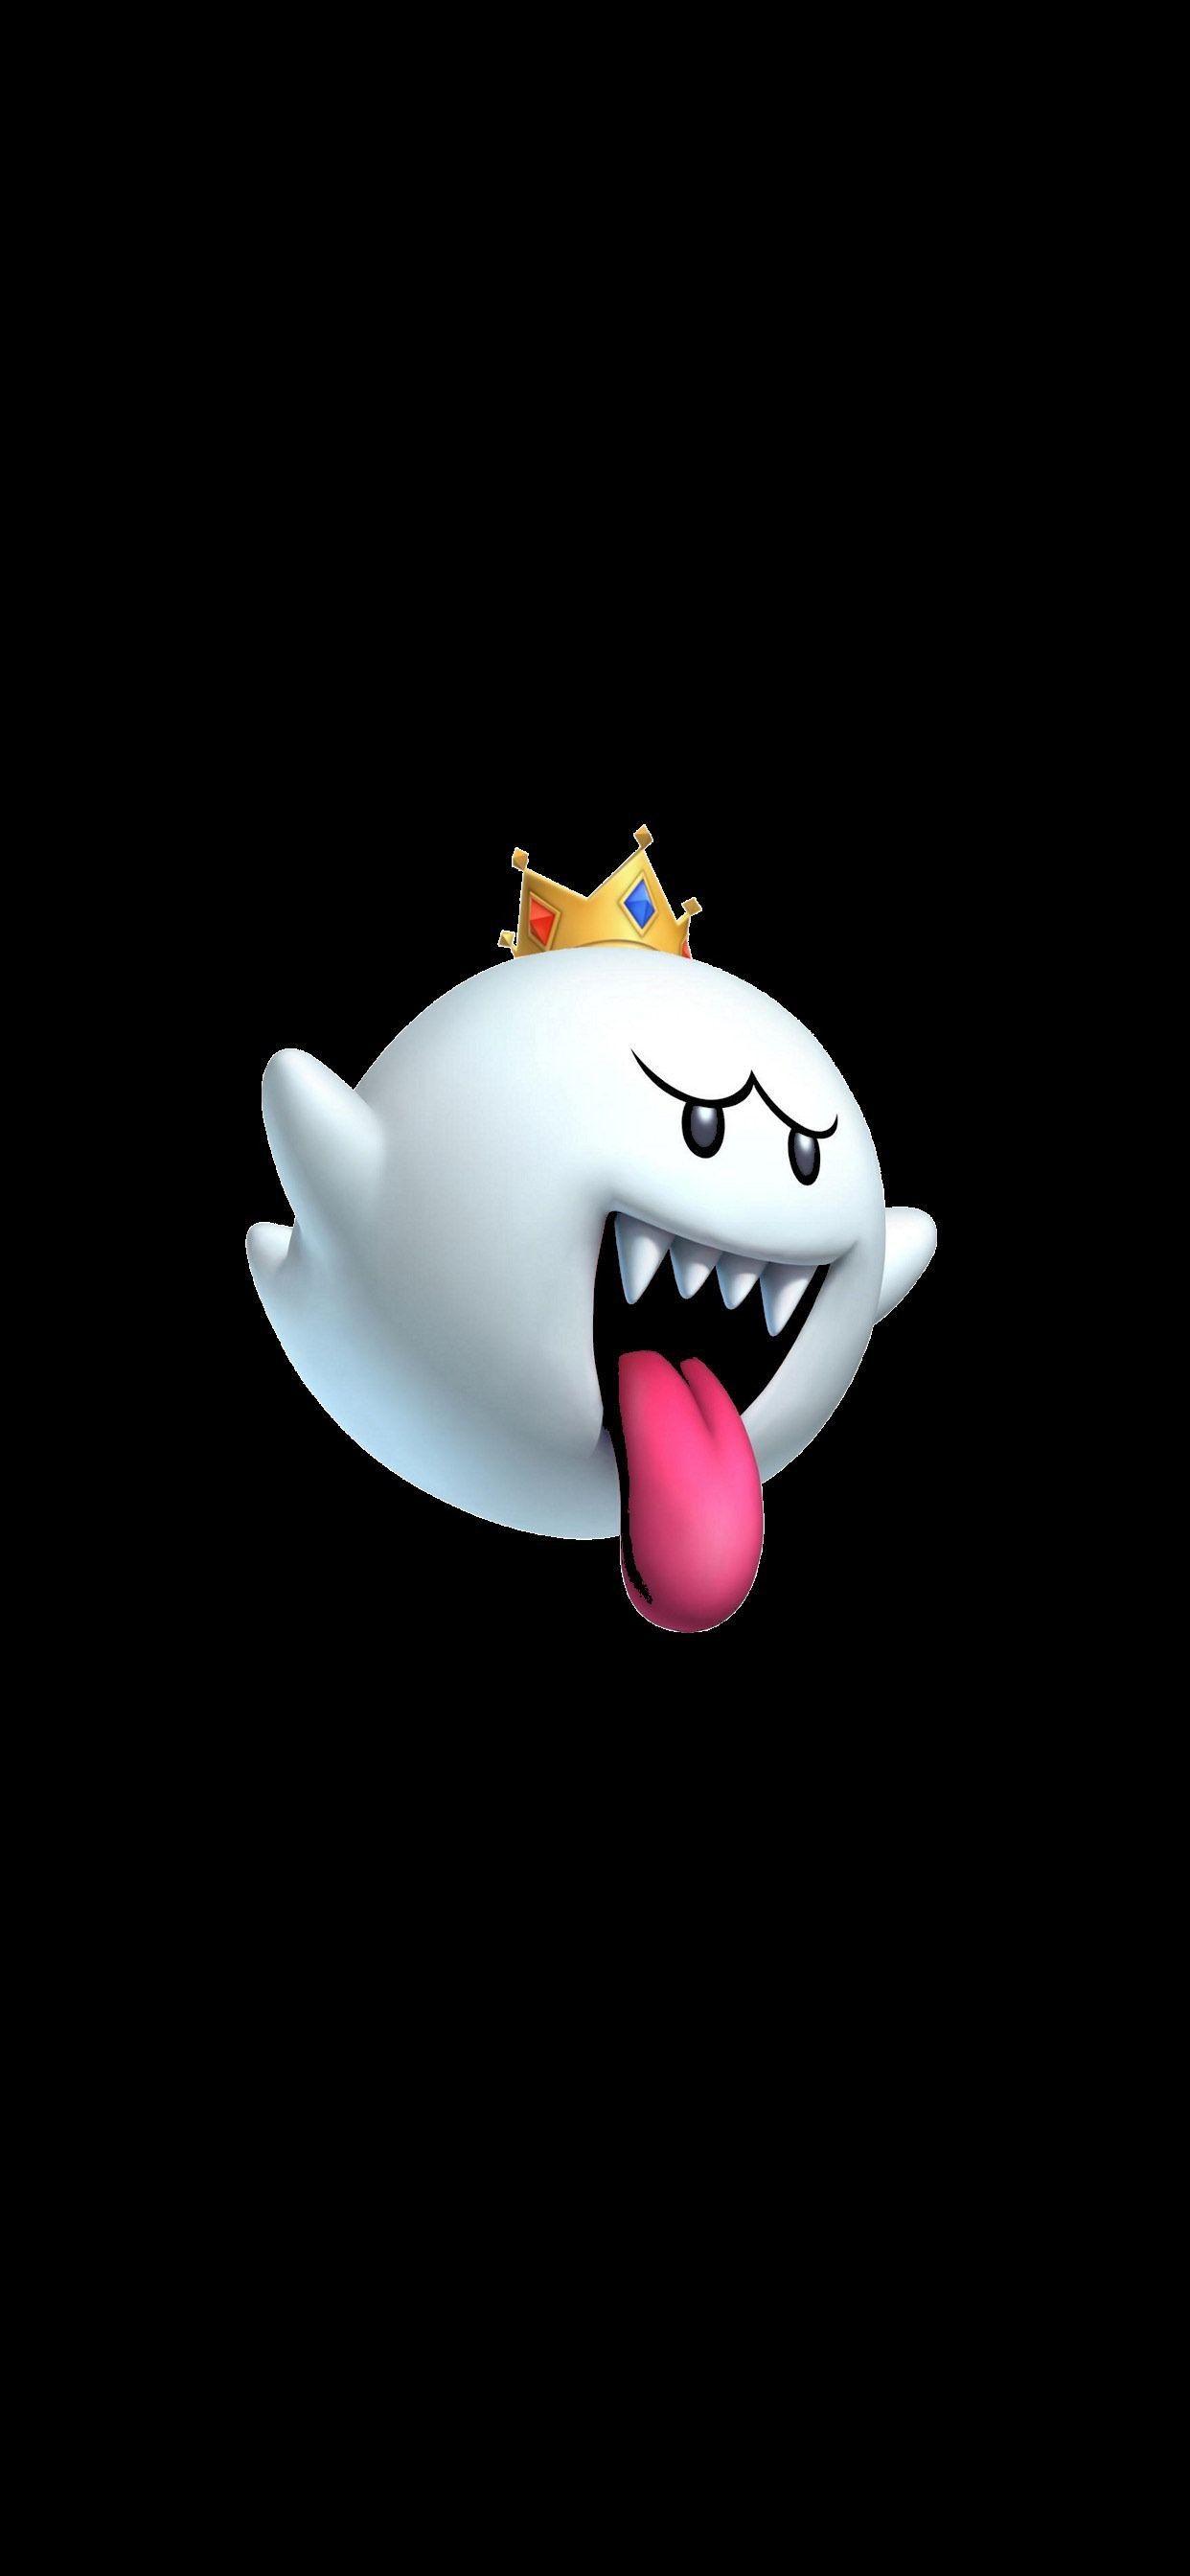 King Boo Wallpapers Top Free King Boo Backgrounds Wallpaperaccess Images, Photos, Reviews